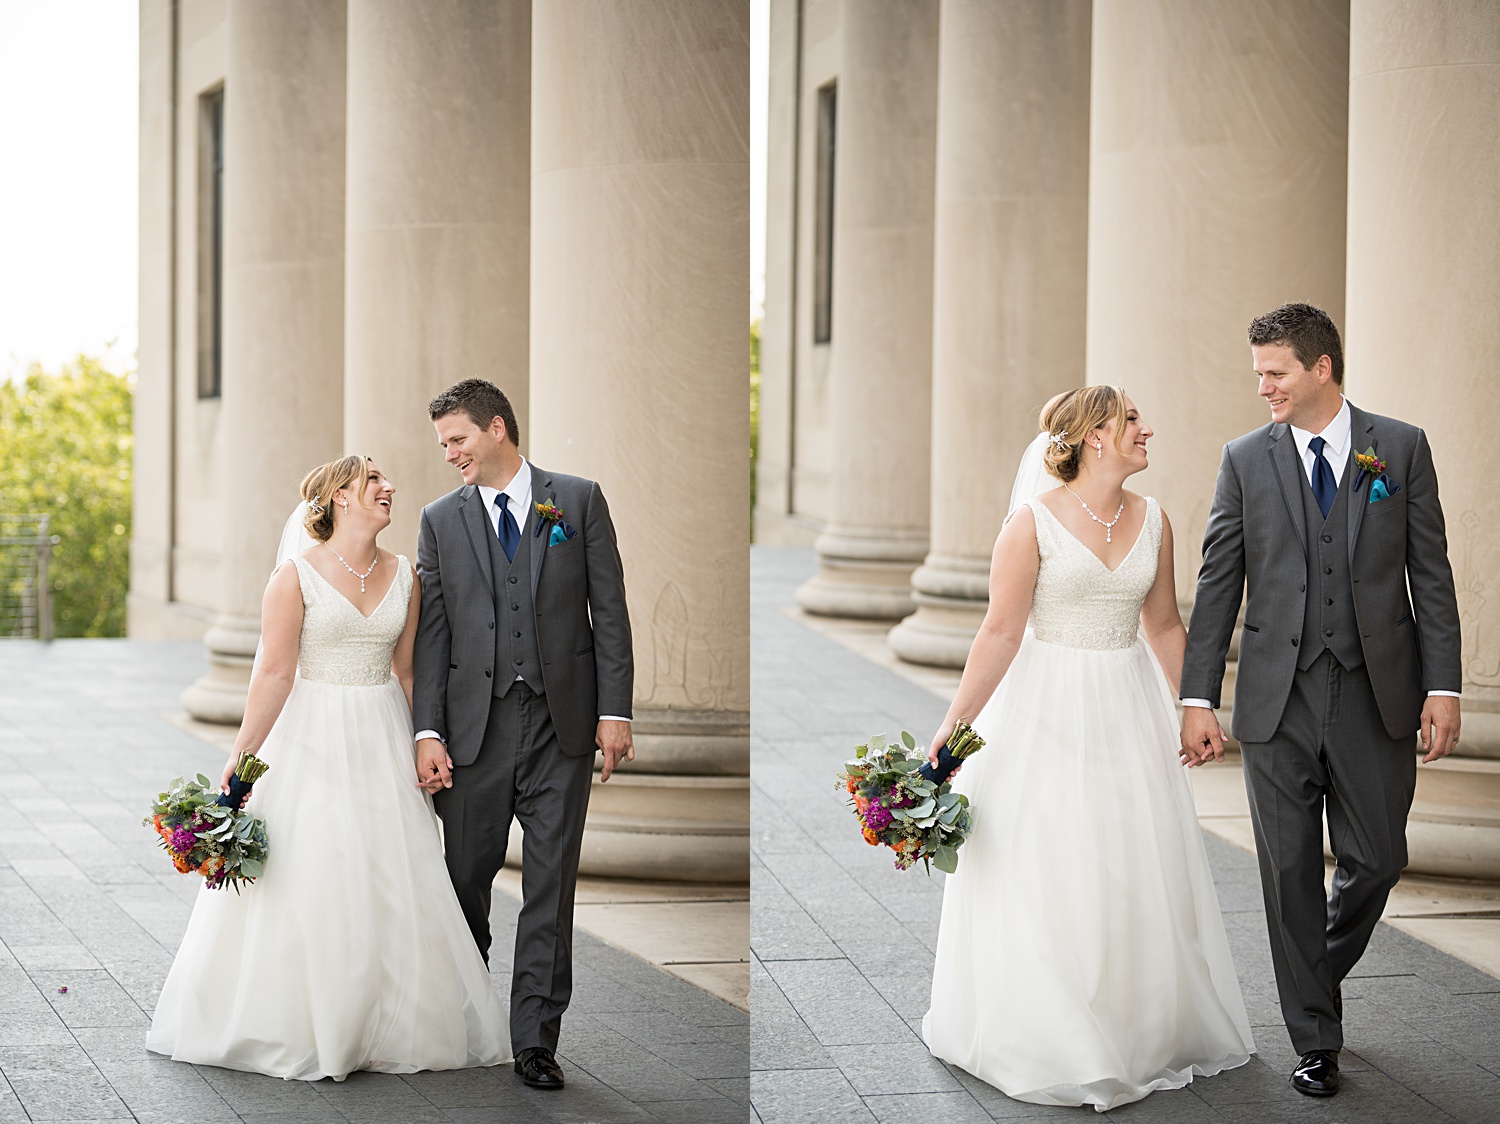 Wedding photos at the Nelson Atkins Museum of Art in Kansas City, MO Emily Lynn Photography